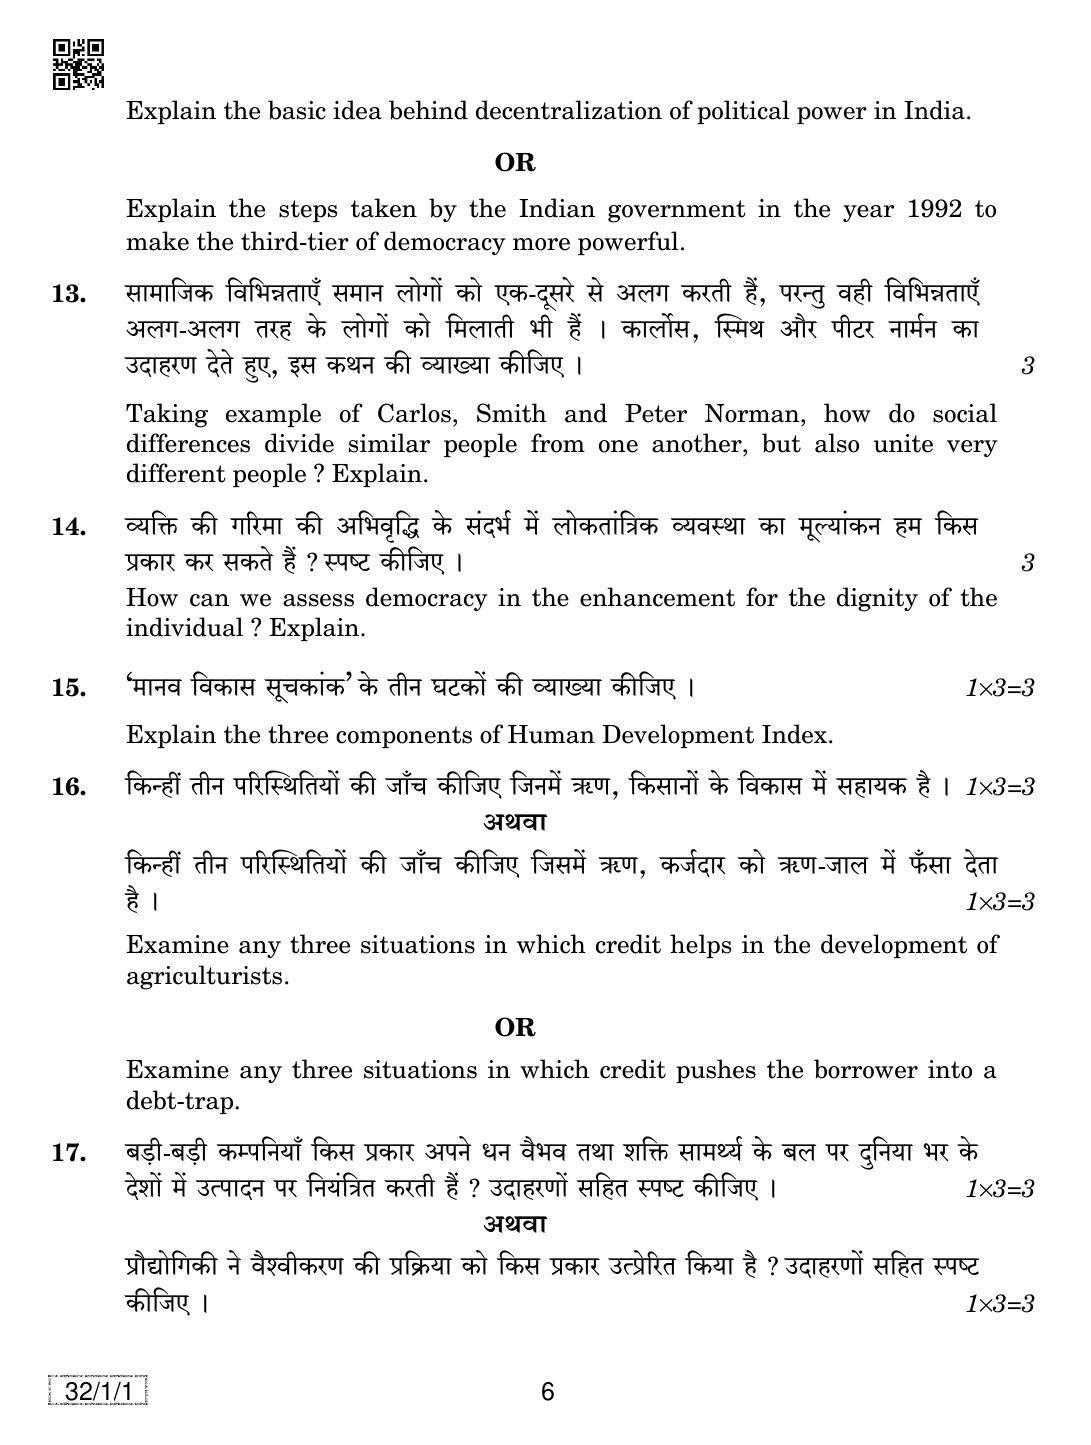 CBSE Class 10 32-1-1 SOCIAL SCIENCE 2019 Compartment Question Paper - Page 6